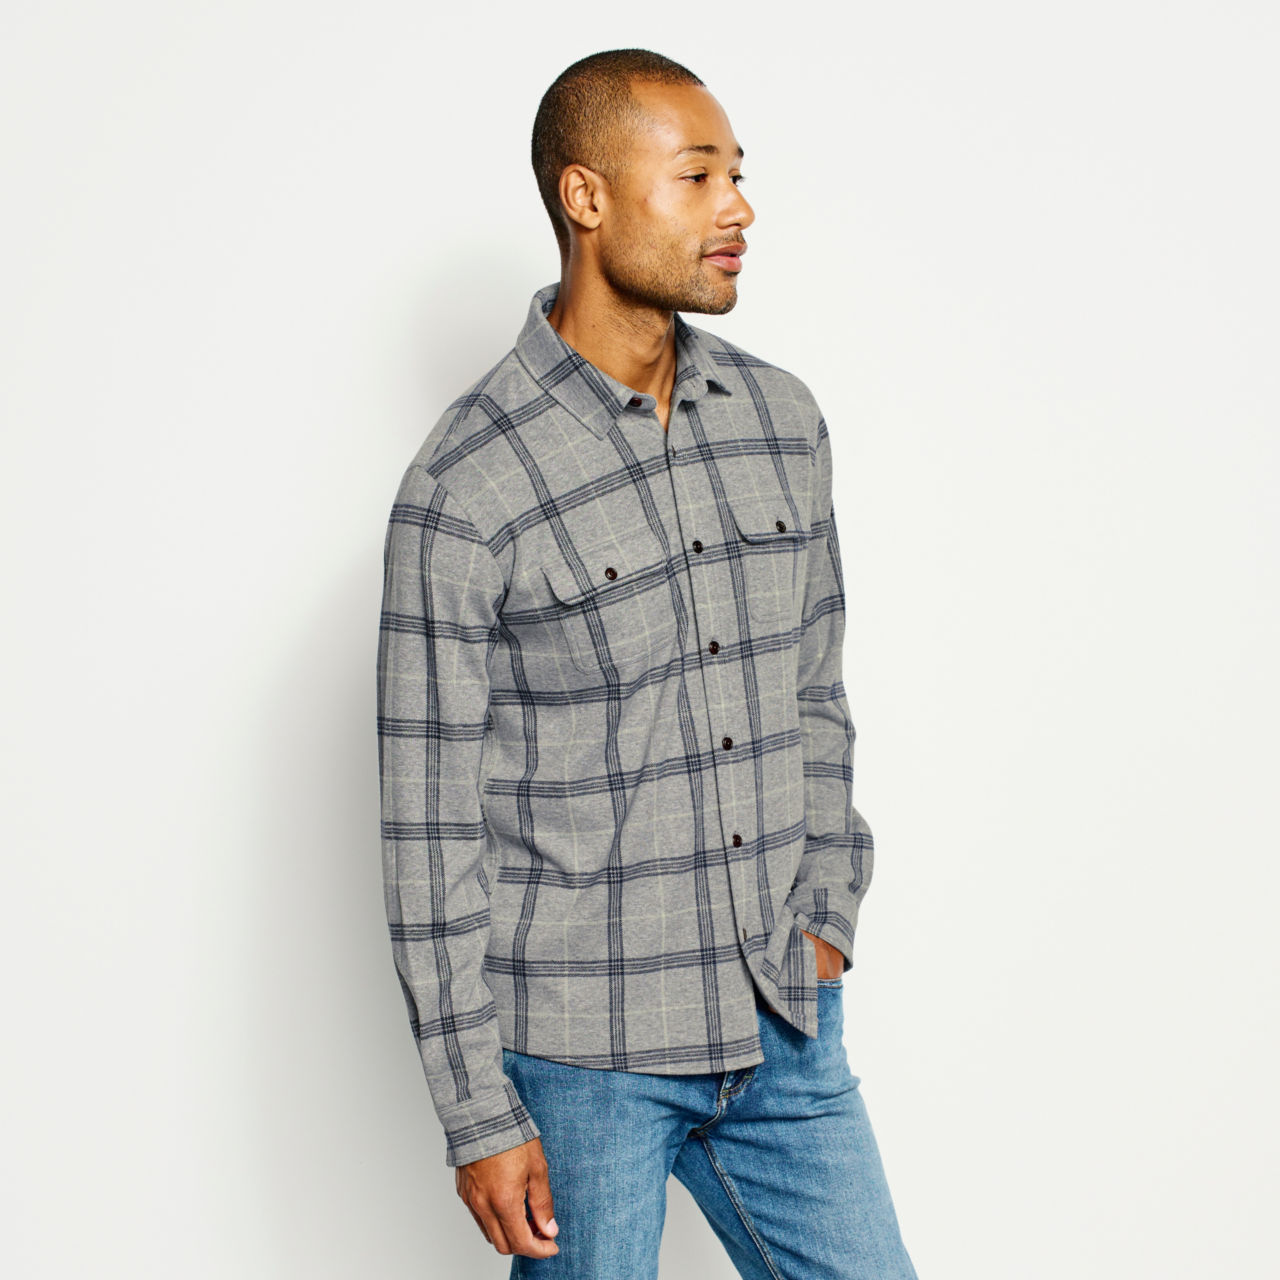 Snowy River Brushed Knit Long-Sleeved Shirt - NAVY PLAID image number 2